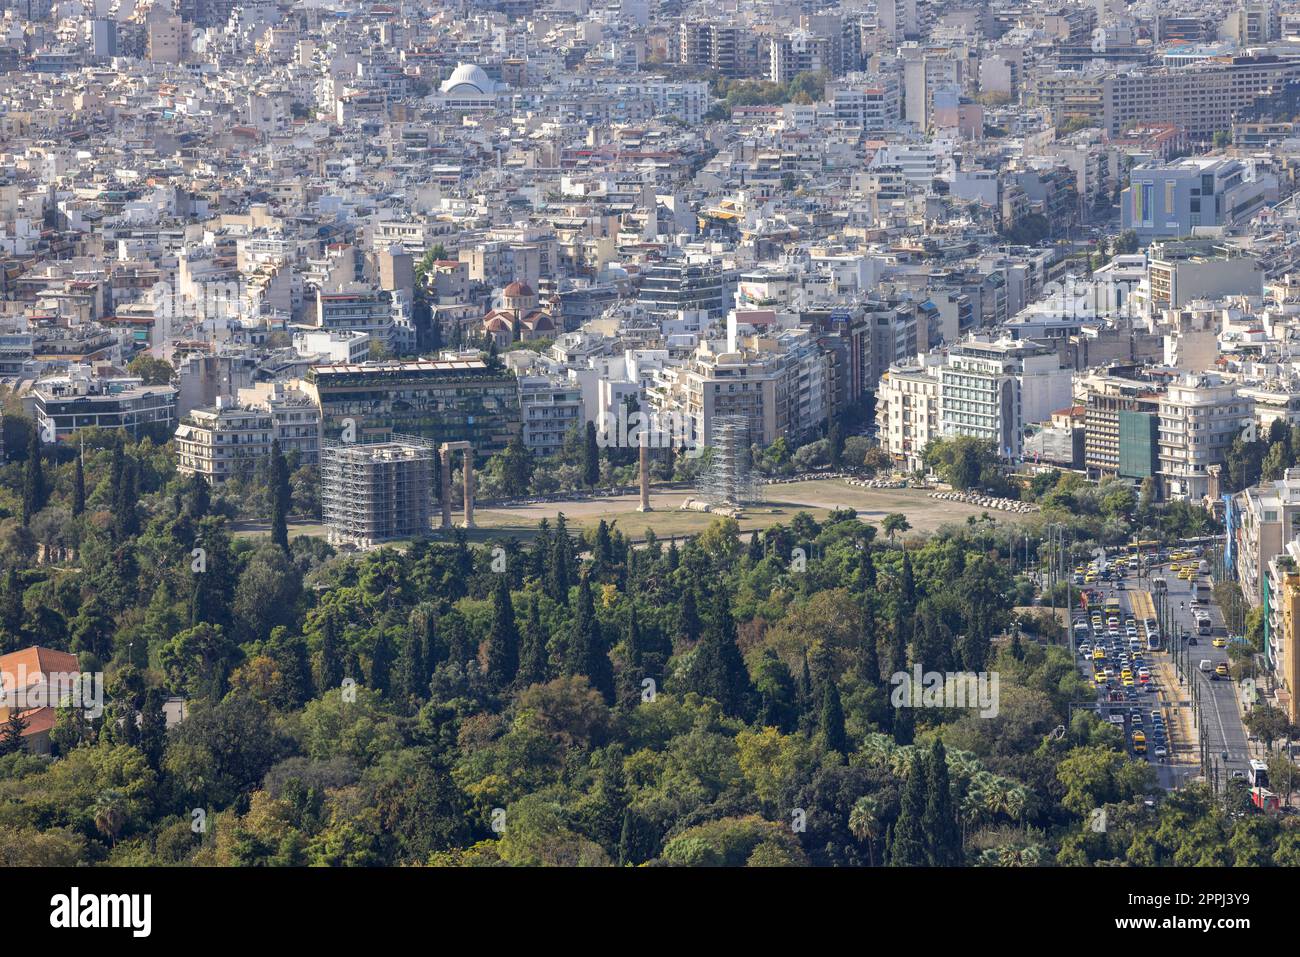 Aerial view of the city with Temple of Olympian Zeus from the Mount Lycabettus, Athens, Greece Stock Photo